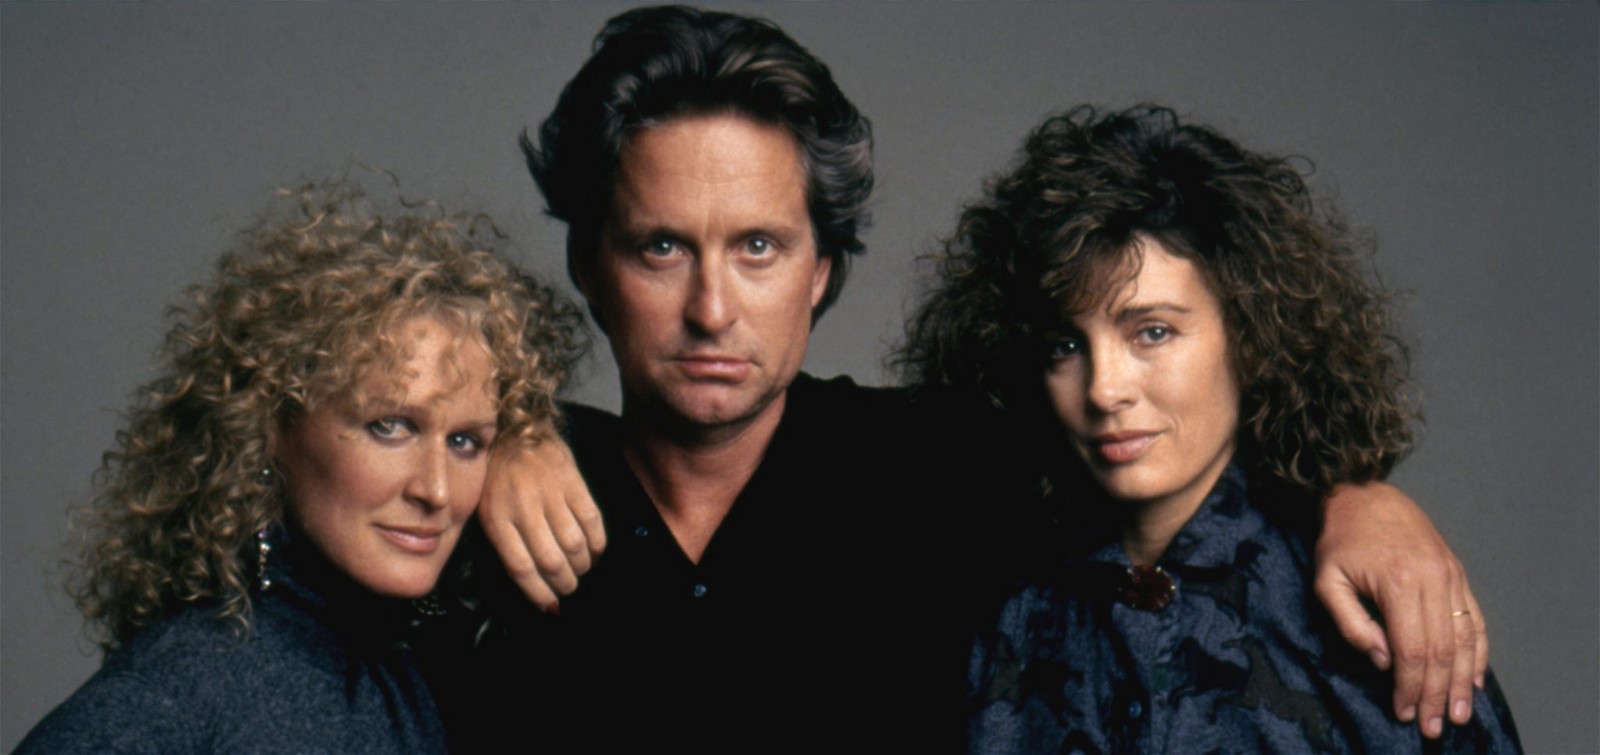 Glenn Close, Michael Douglas and Anne Archer on the set of Fatal Attraction